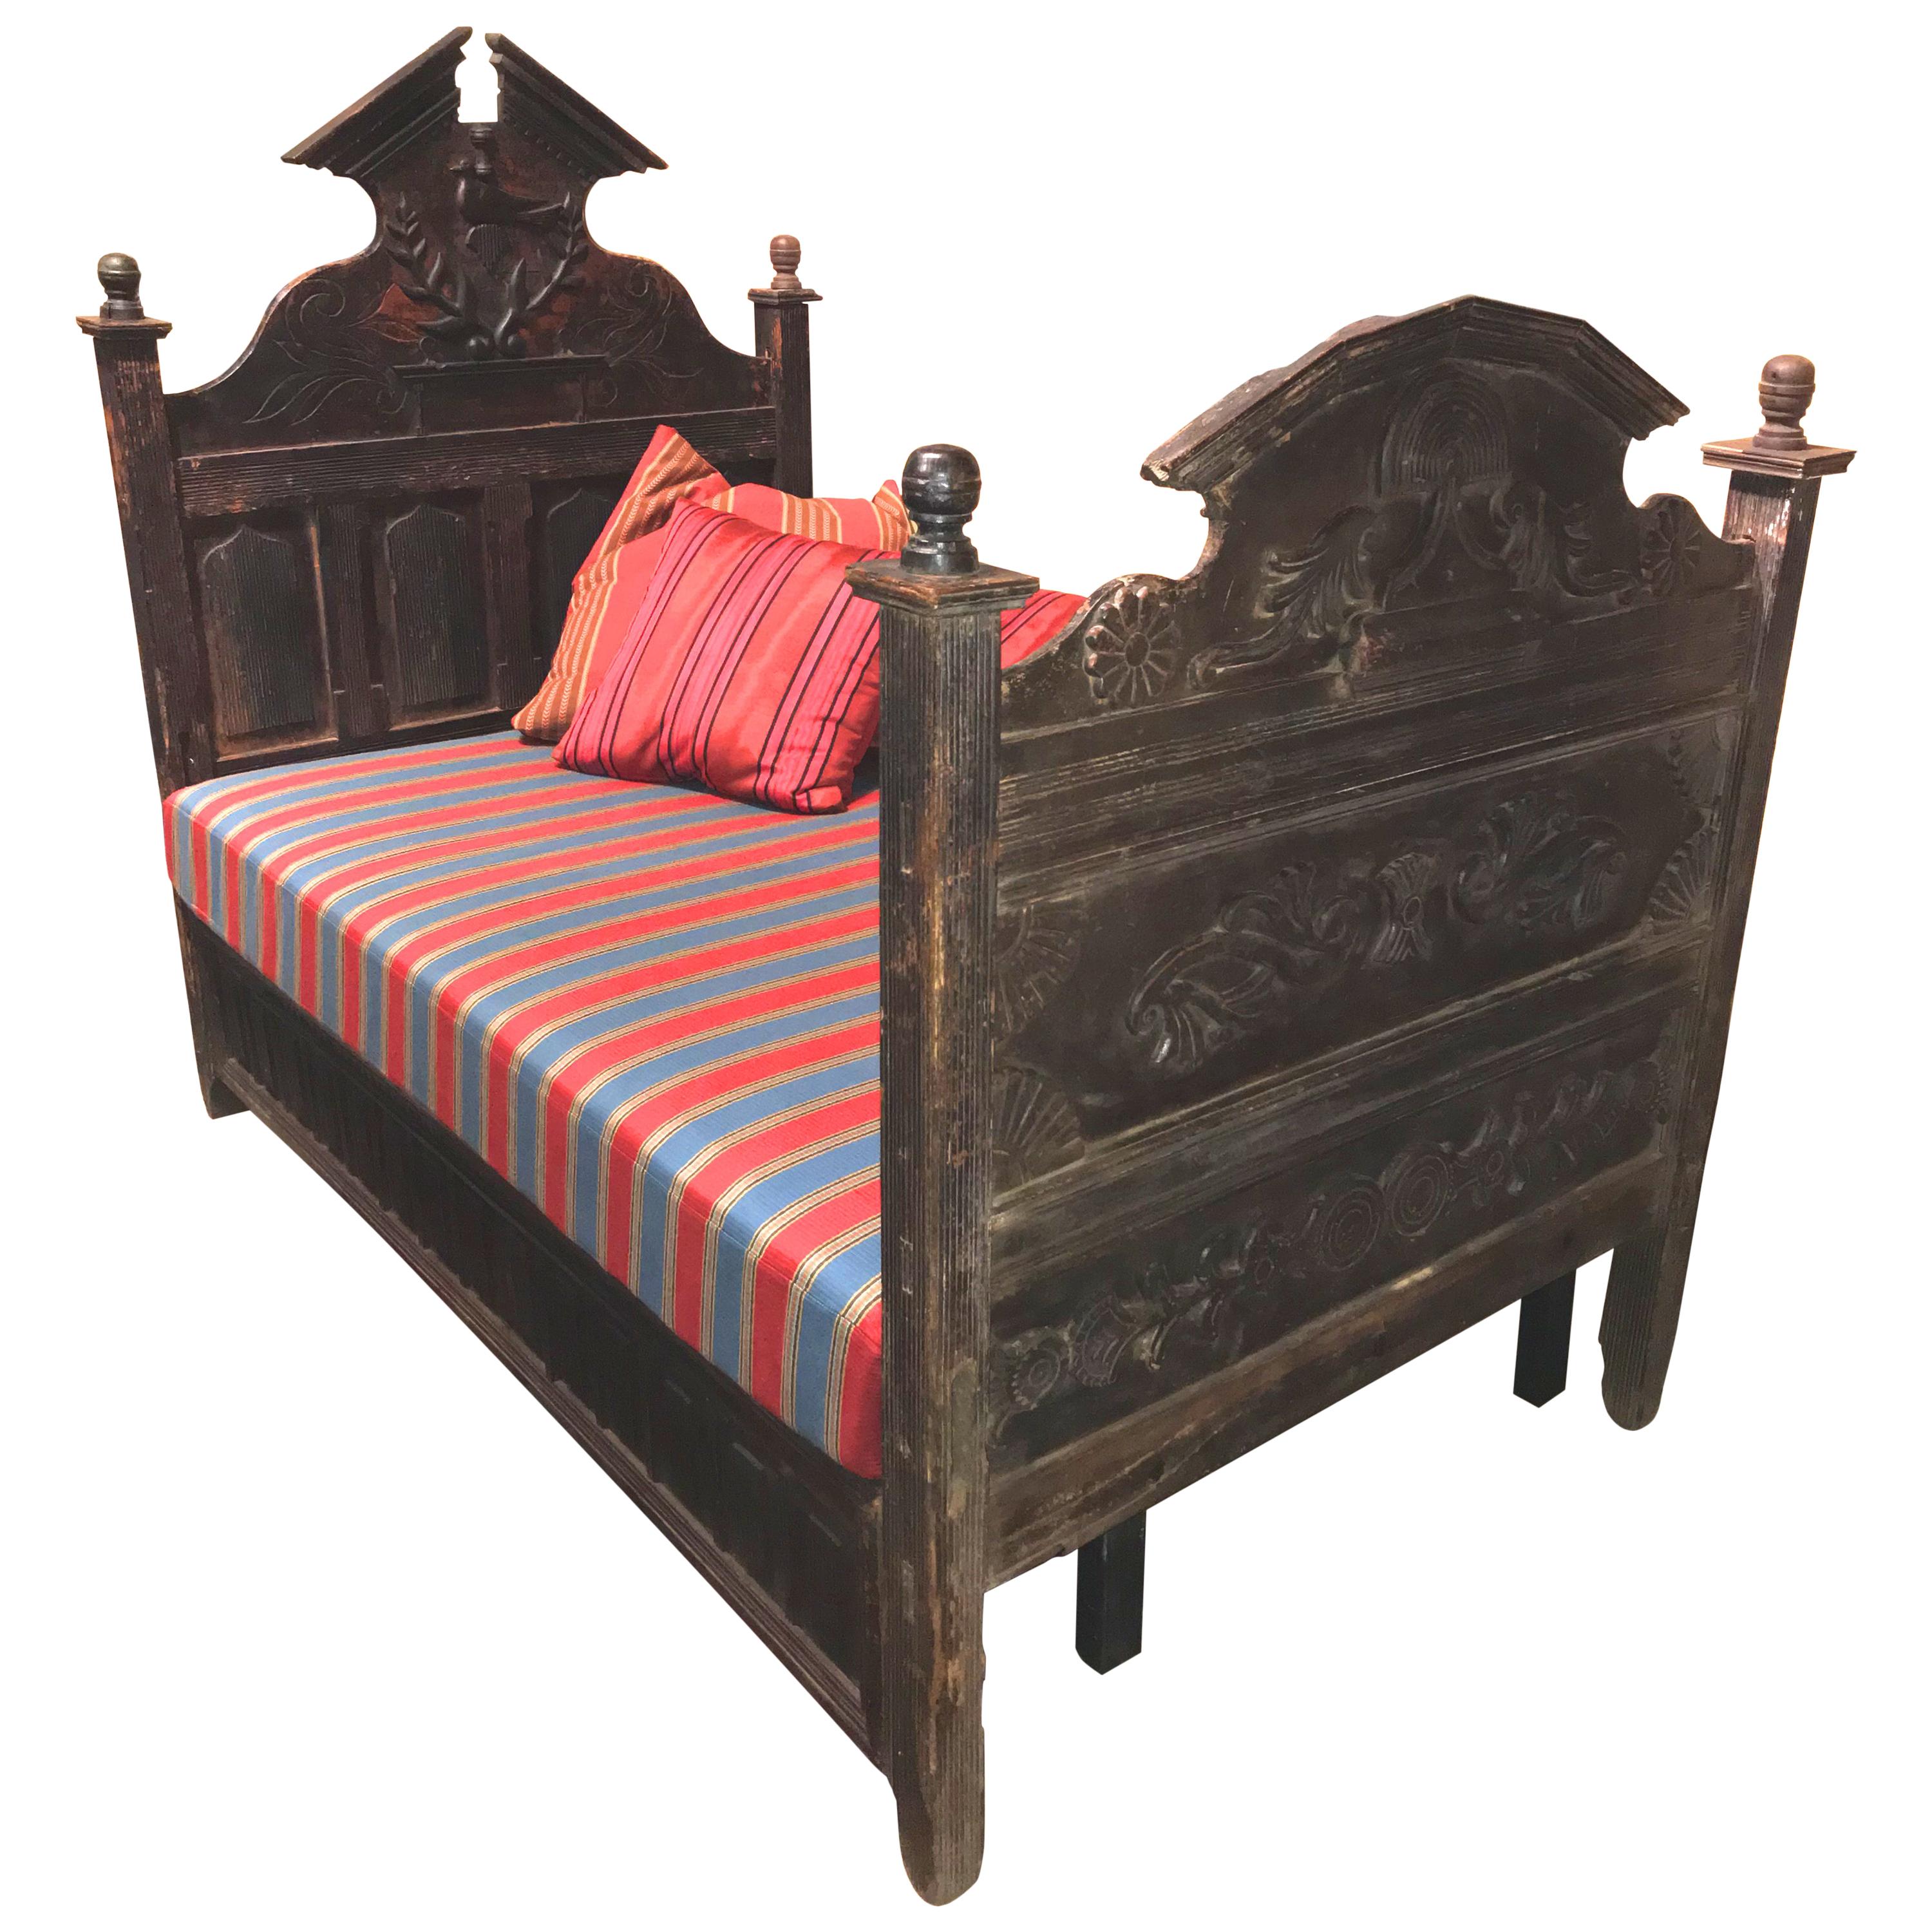 Early 19th Century Carved Guatemalan Daybed